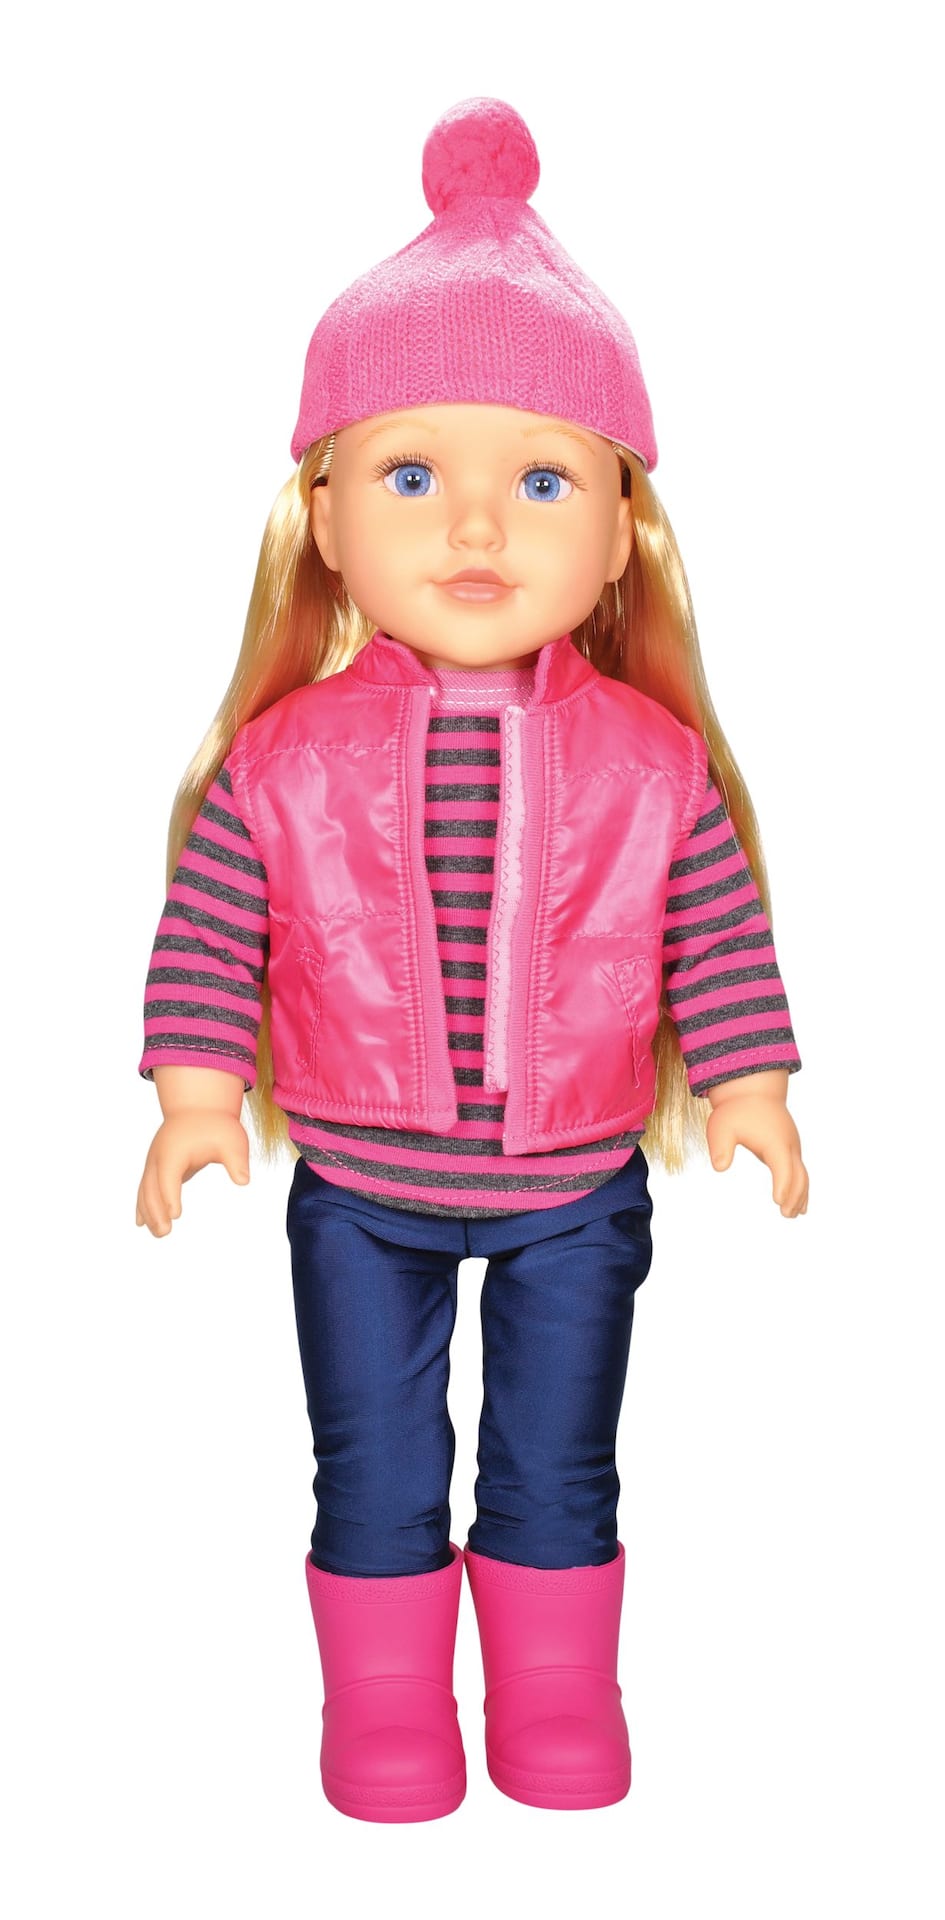 Stella & Finn Newberry Deluxe Doll, Olivia, 18-in Toy Figure for